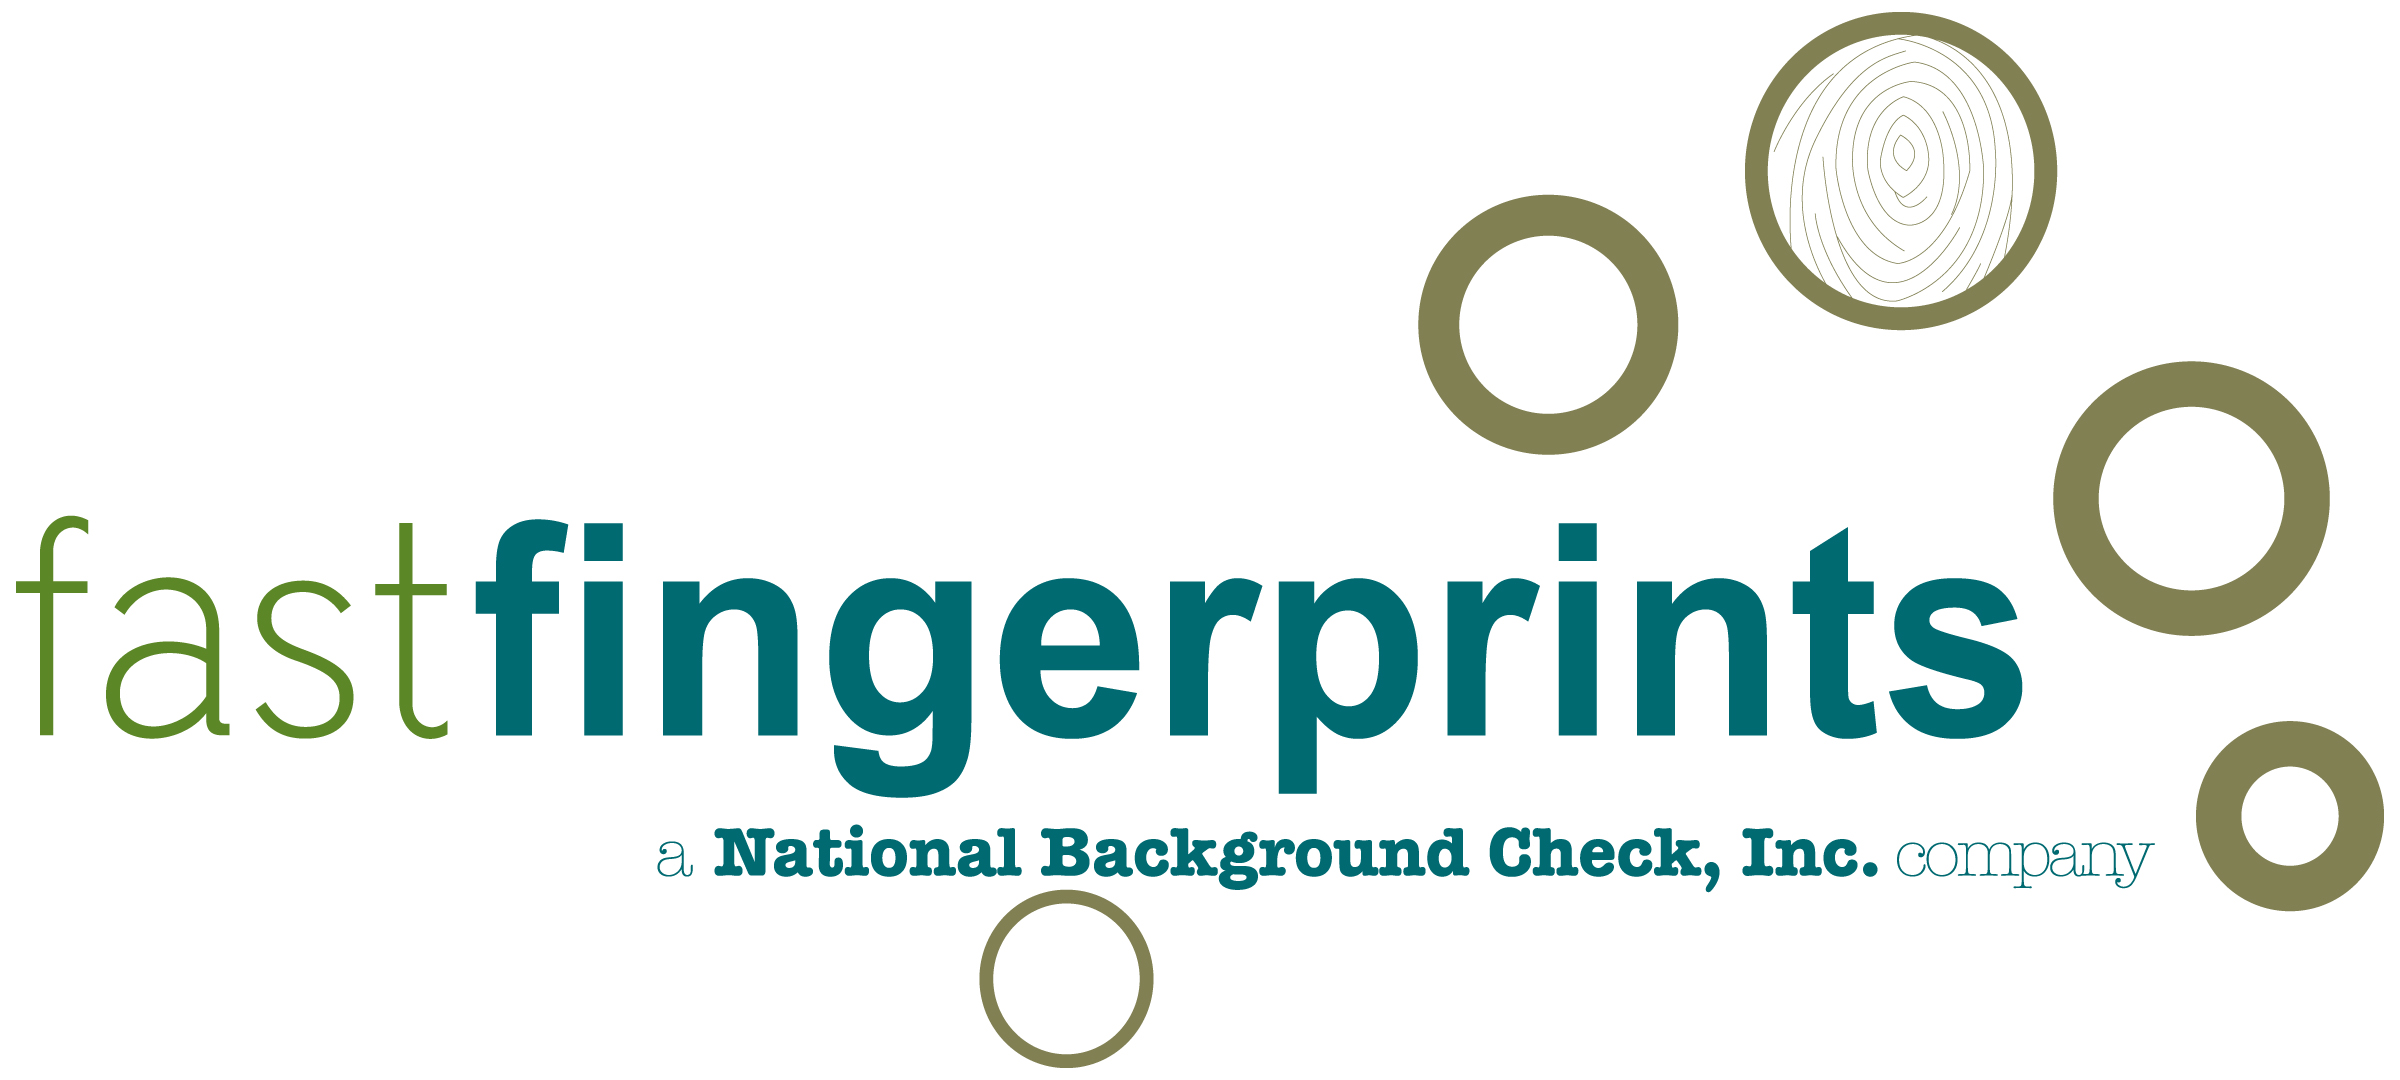  FastFingerprints Expands to The North College Hill Area with A New Livescan Fingerprinting Location 